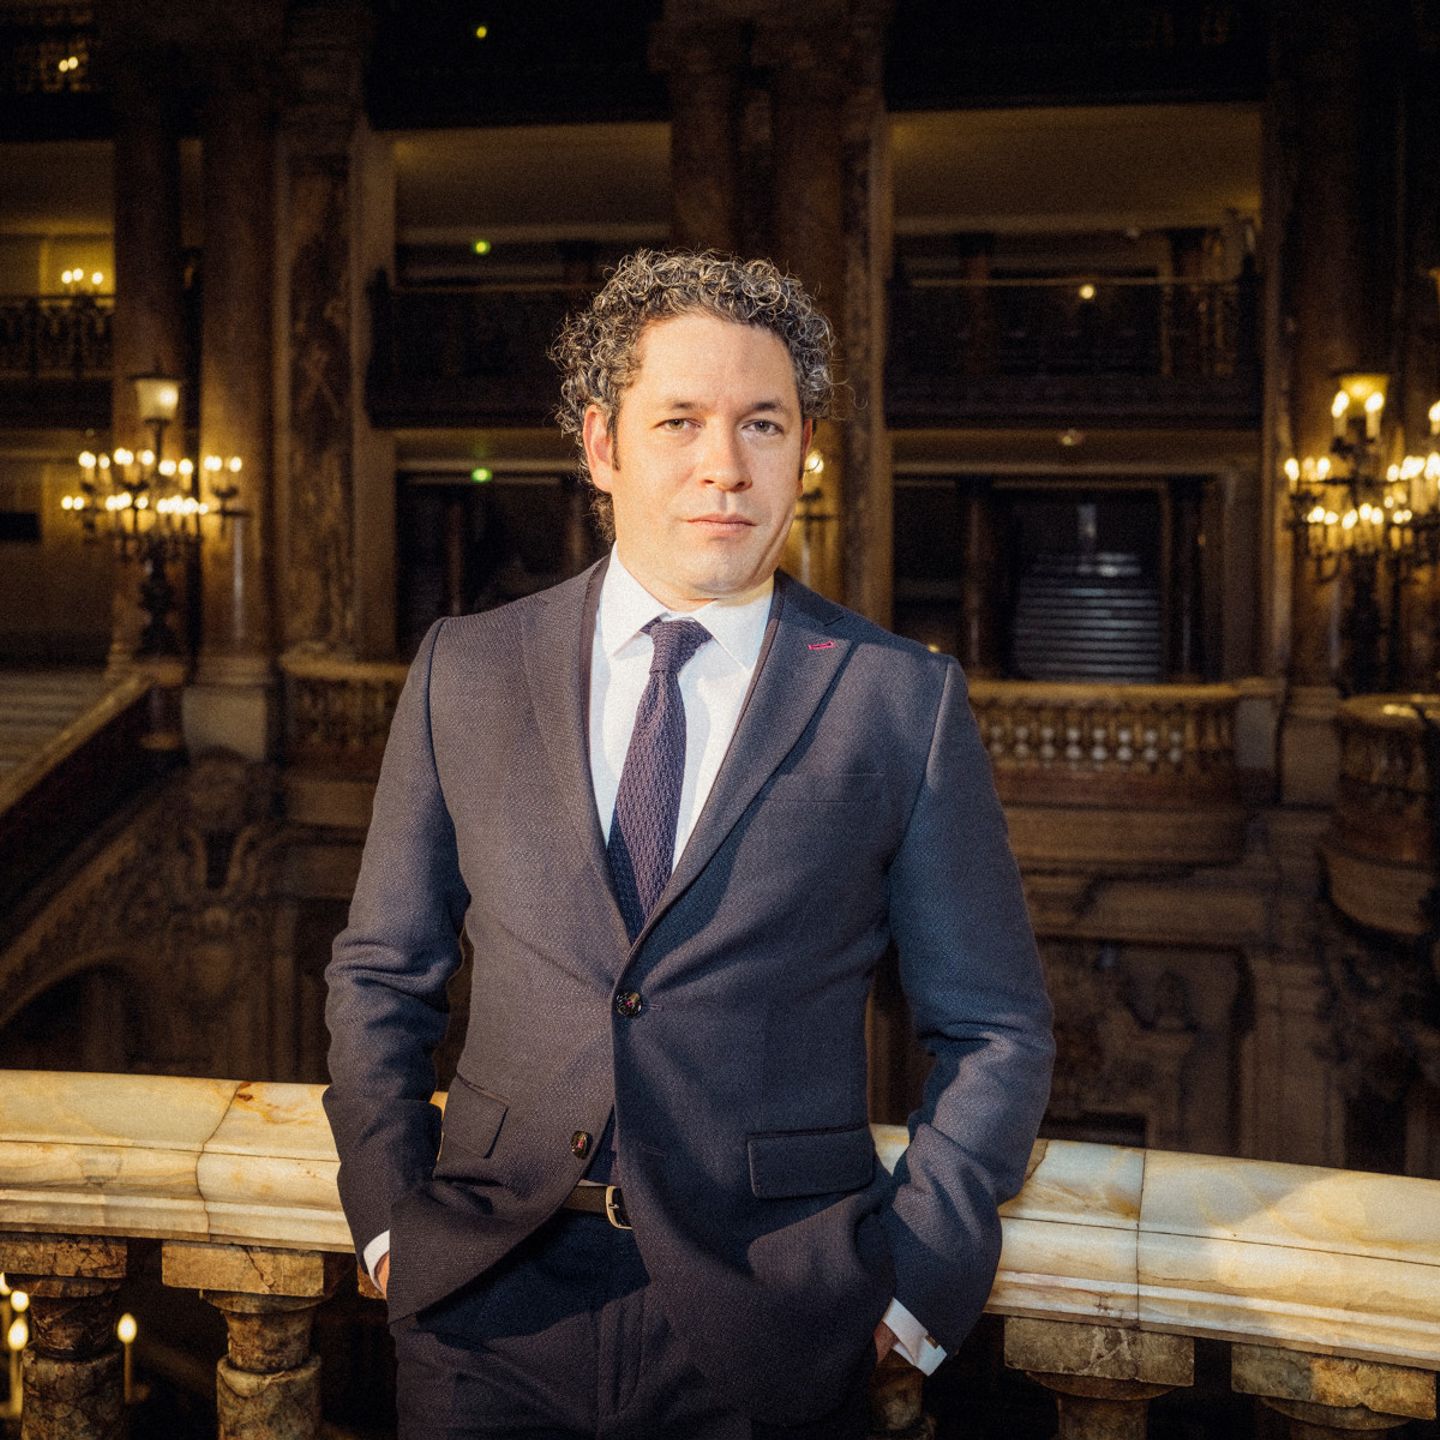 Gustavo Dudamel in a suit sitting on a bench